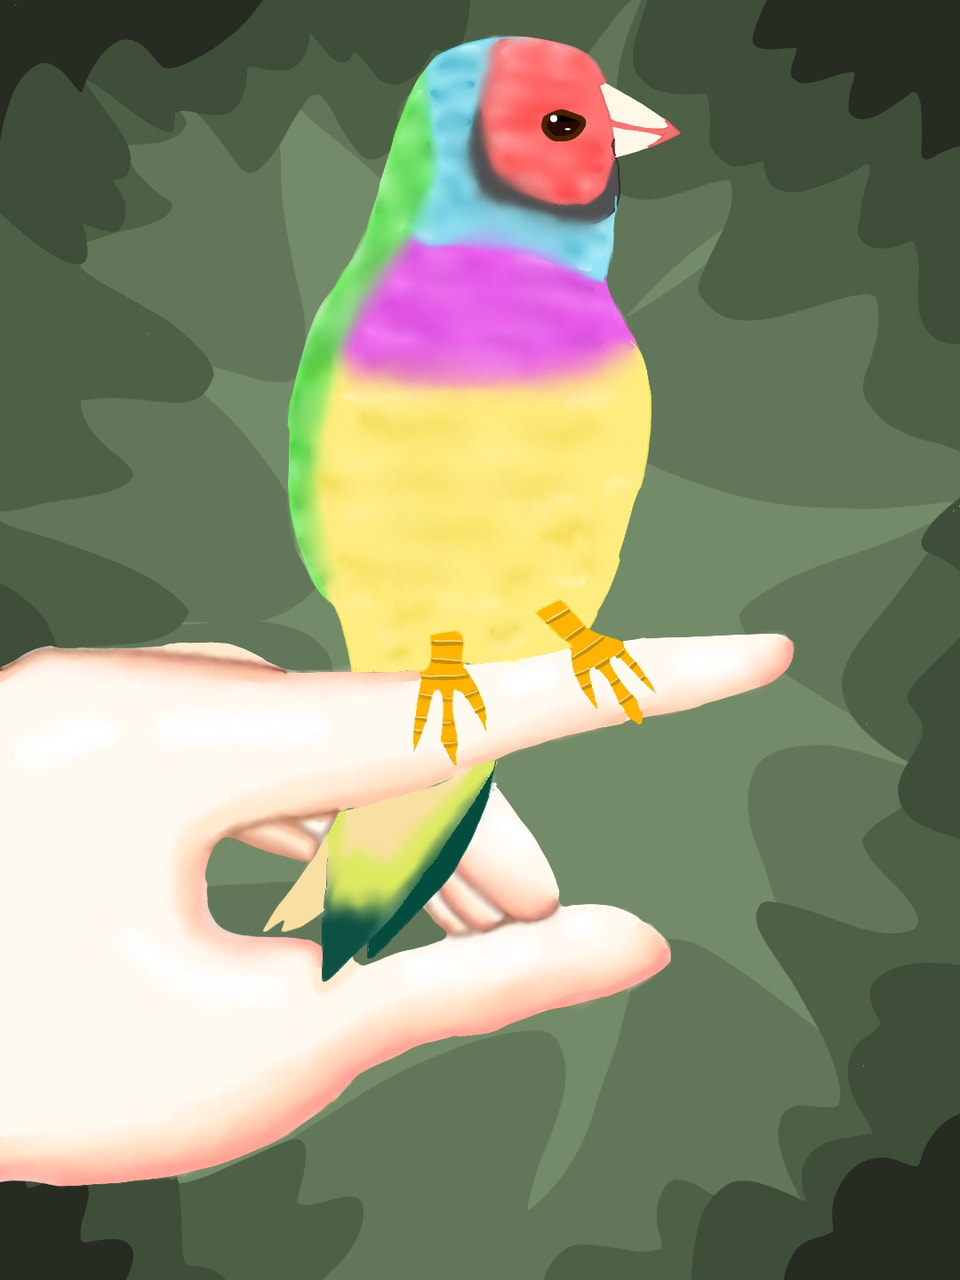 #fridayswithske #tch #MotherLanguageDay  my proverb is "A Bird in the hand is worth two in the bush". I hope you like the lineless look, it's not something I do often . Edit : OMG I've been featured thank you so much everyone